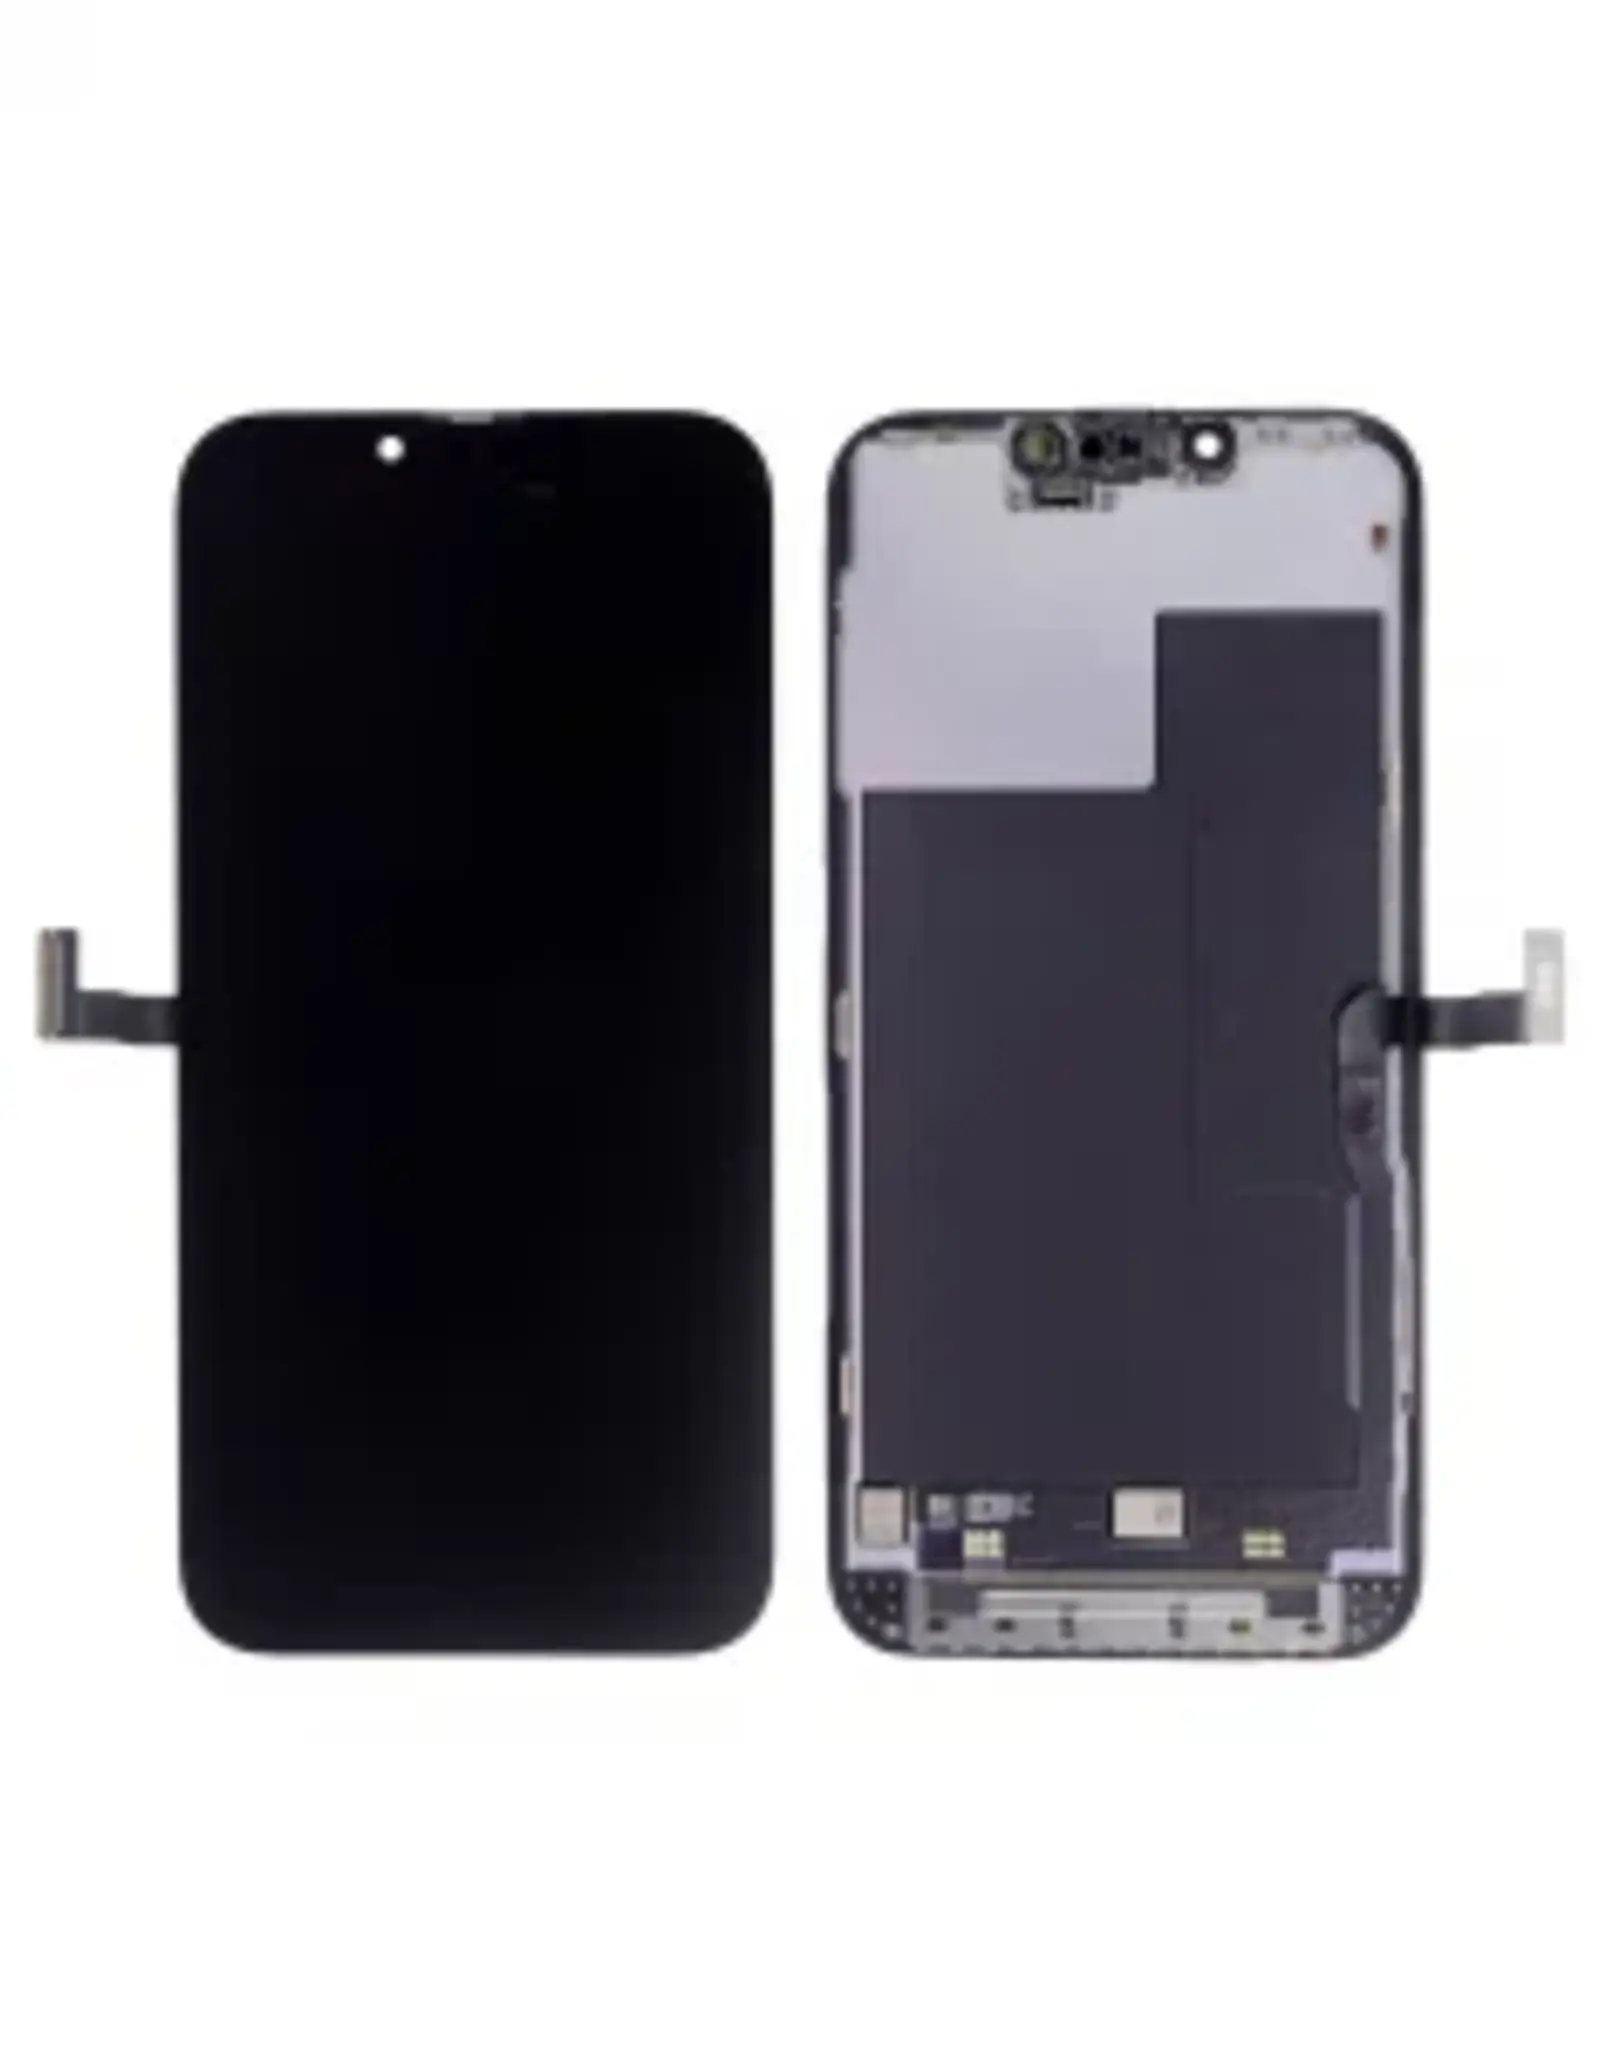 Apple iPhone 13 Pro LCD Screen Replacement (parts)